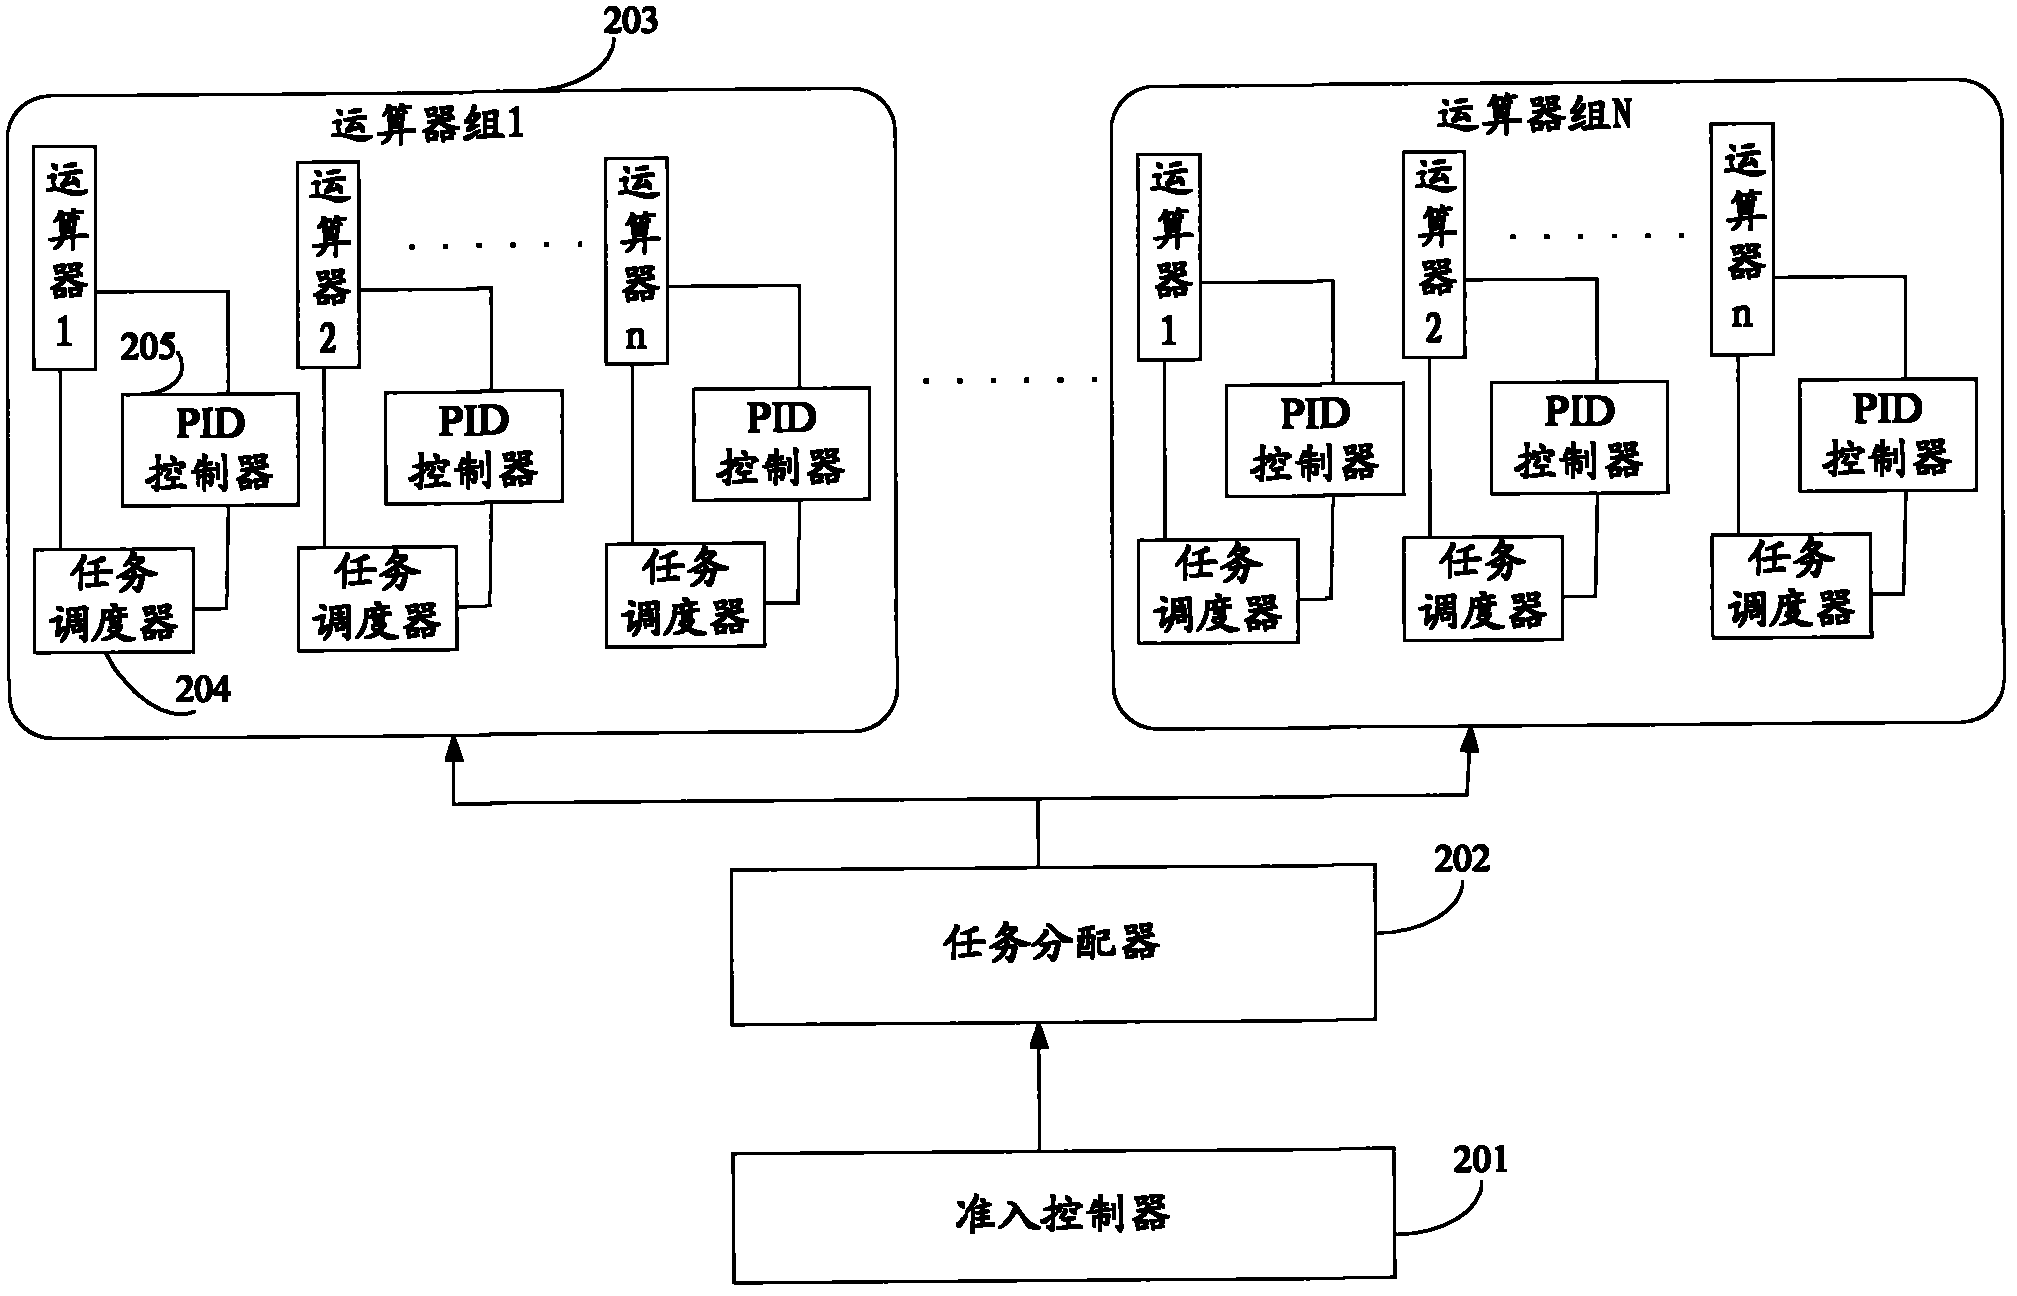 Workflow managing method and system